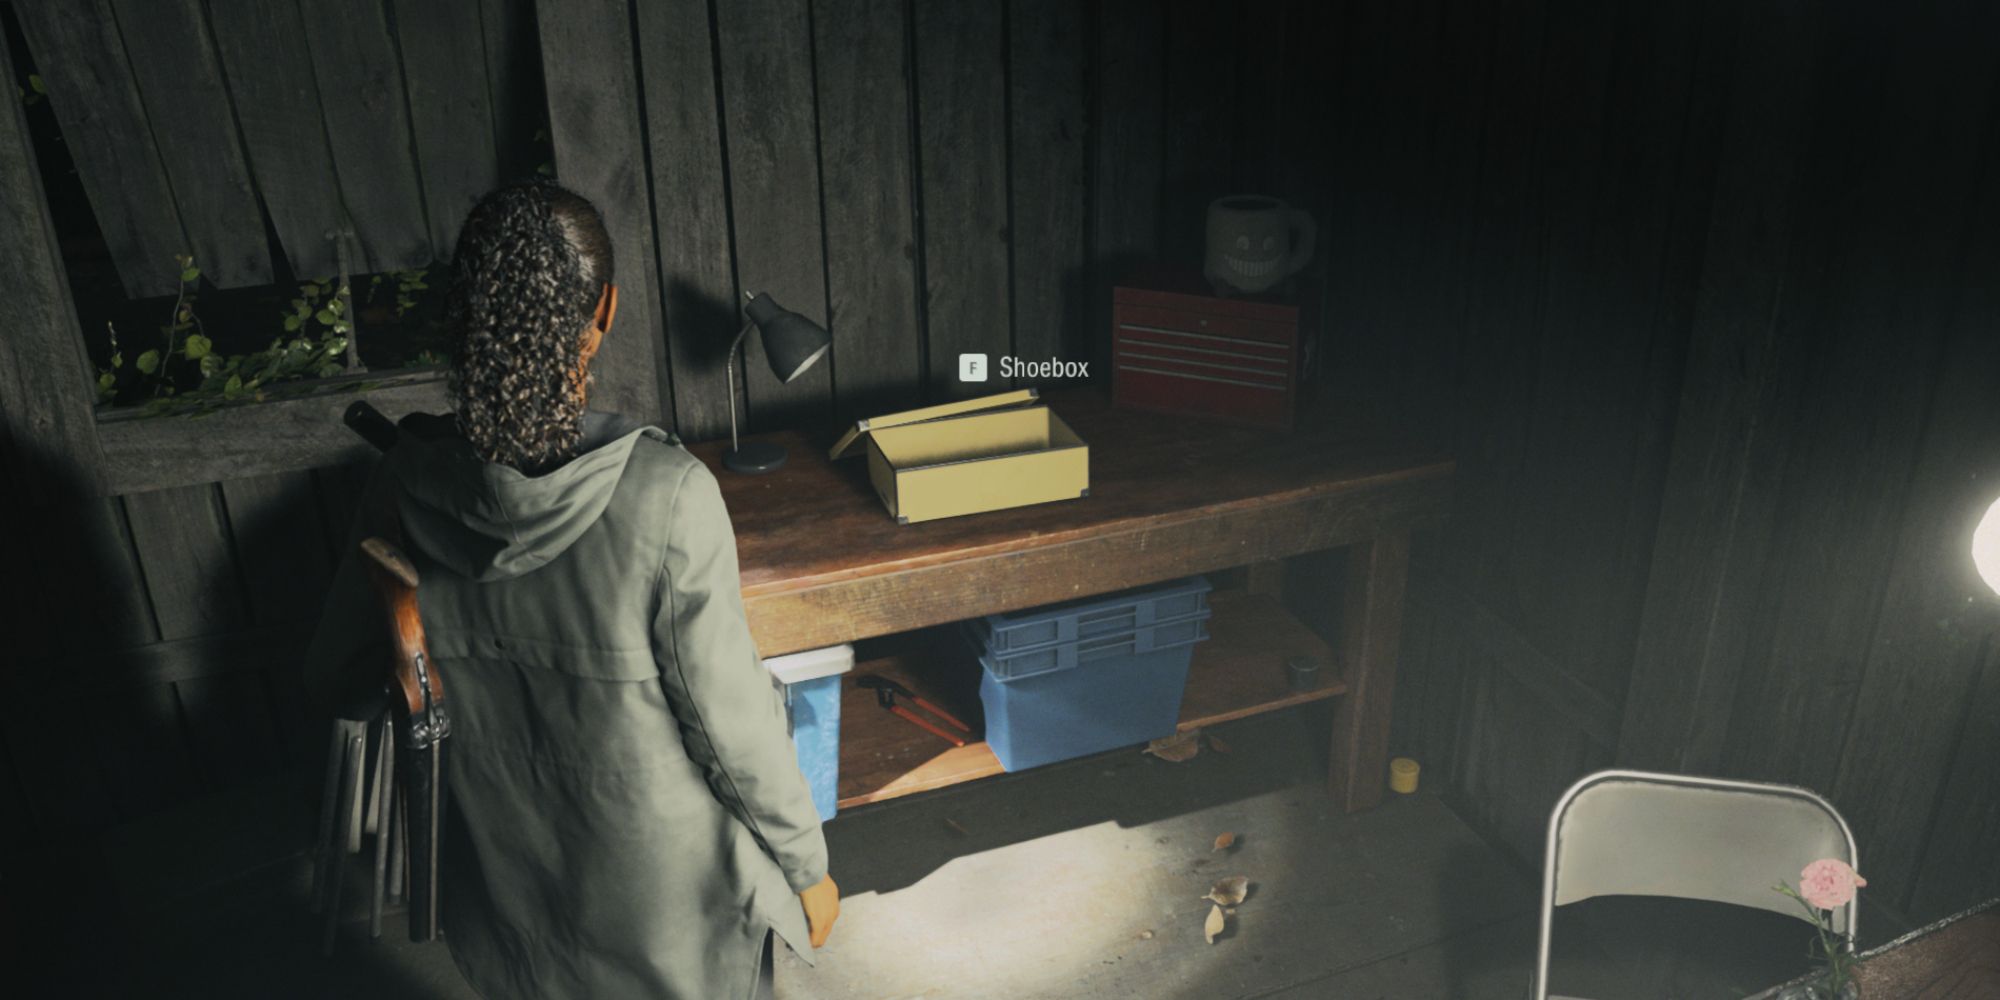 saga anderson stores her excess inventory in a shoebox in alan wake 2